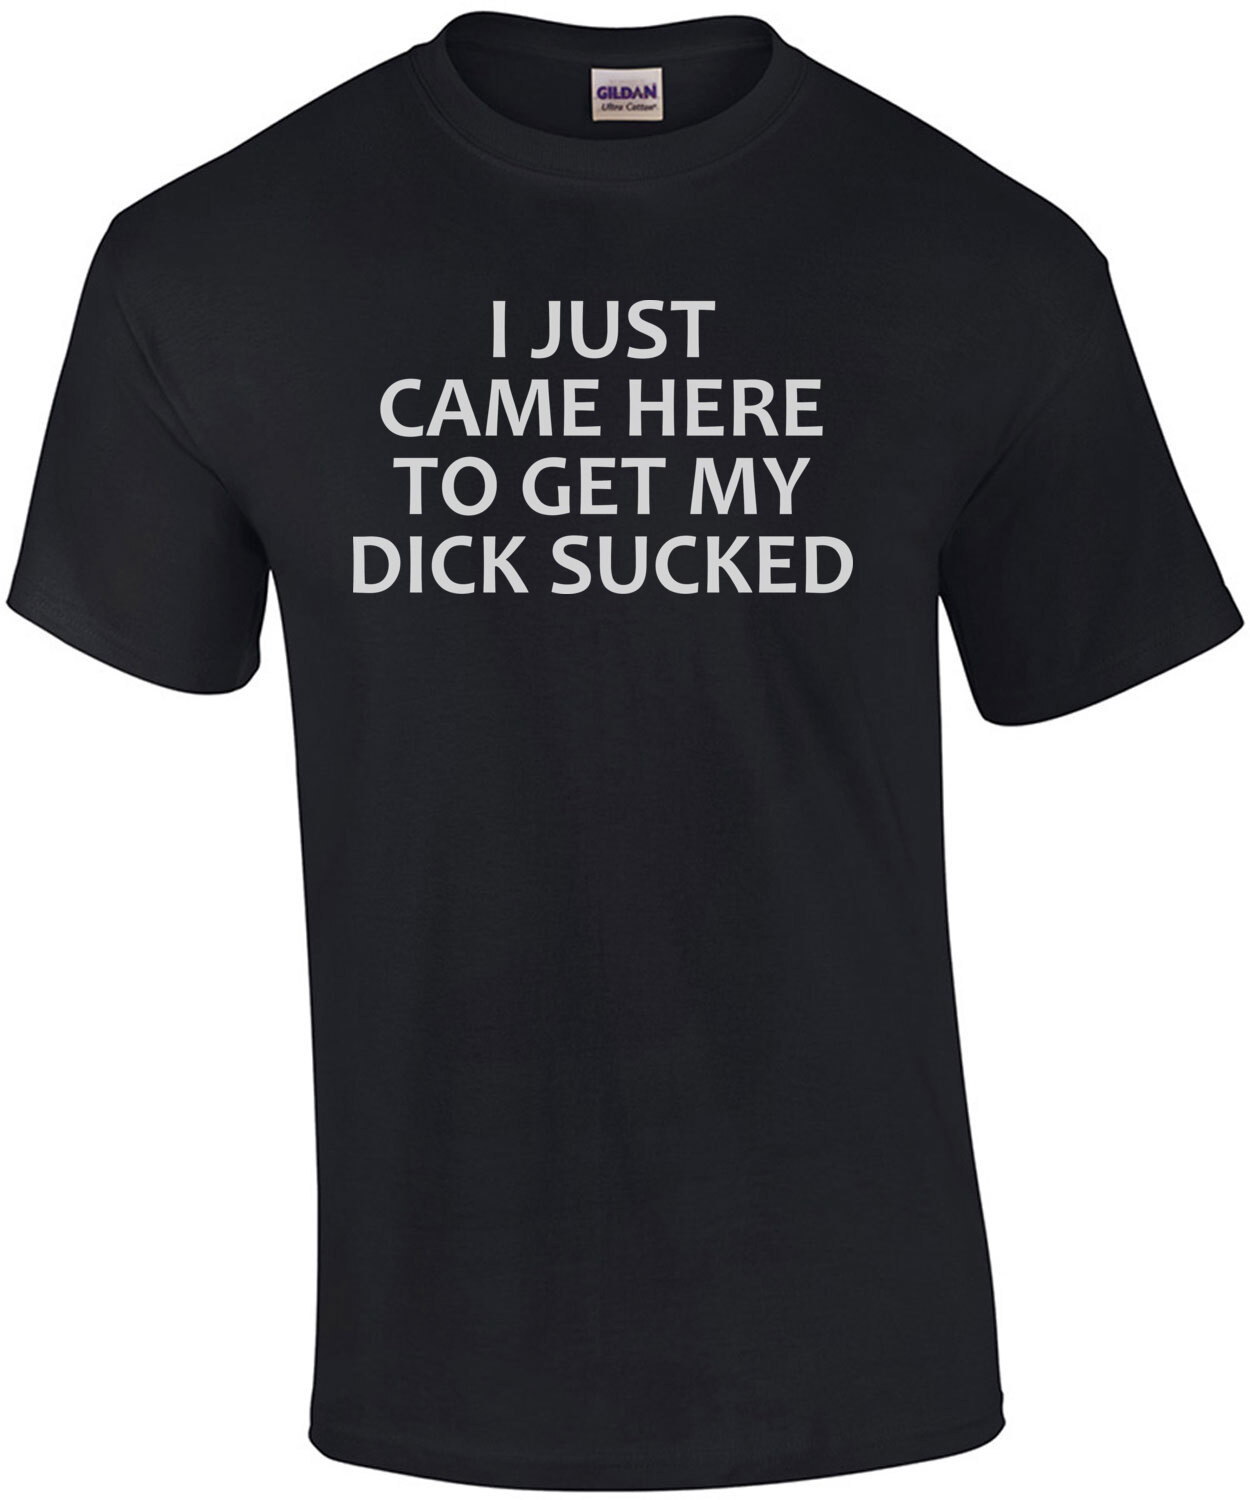 I Just Came Here To Get My Dick Sucked Funny Offensive Sexual T Shirt